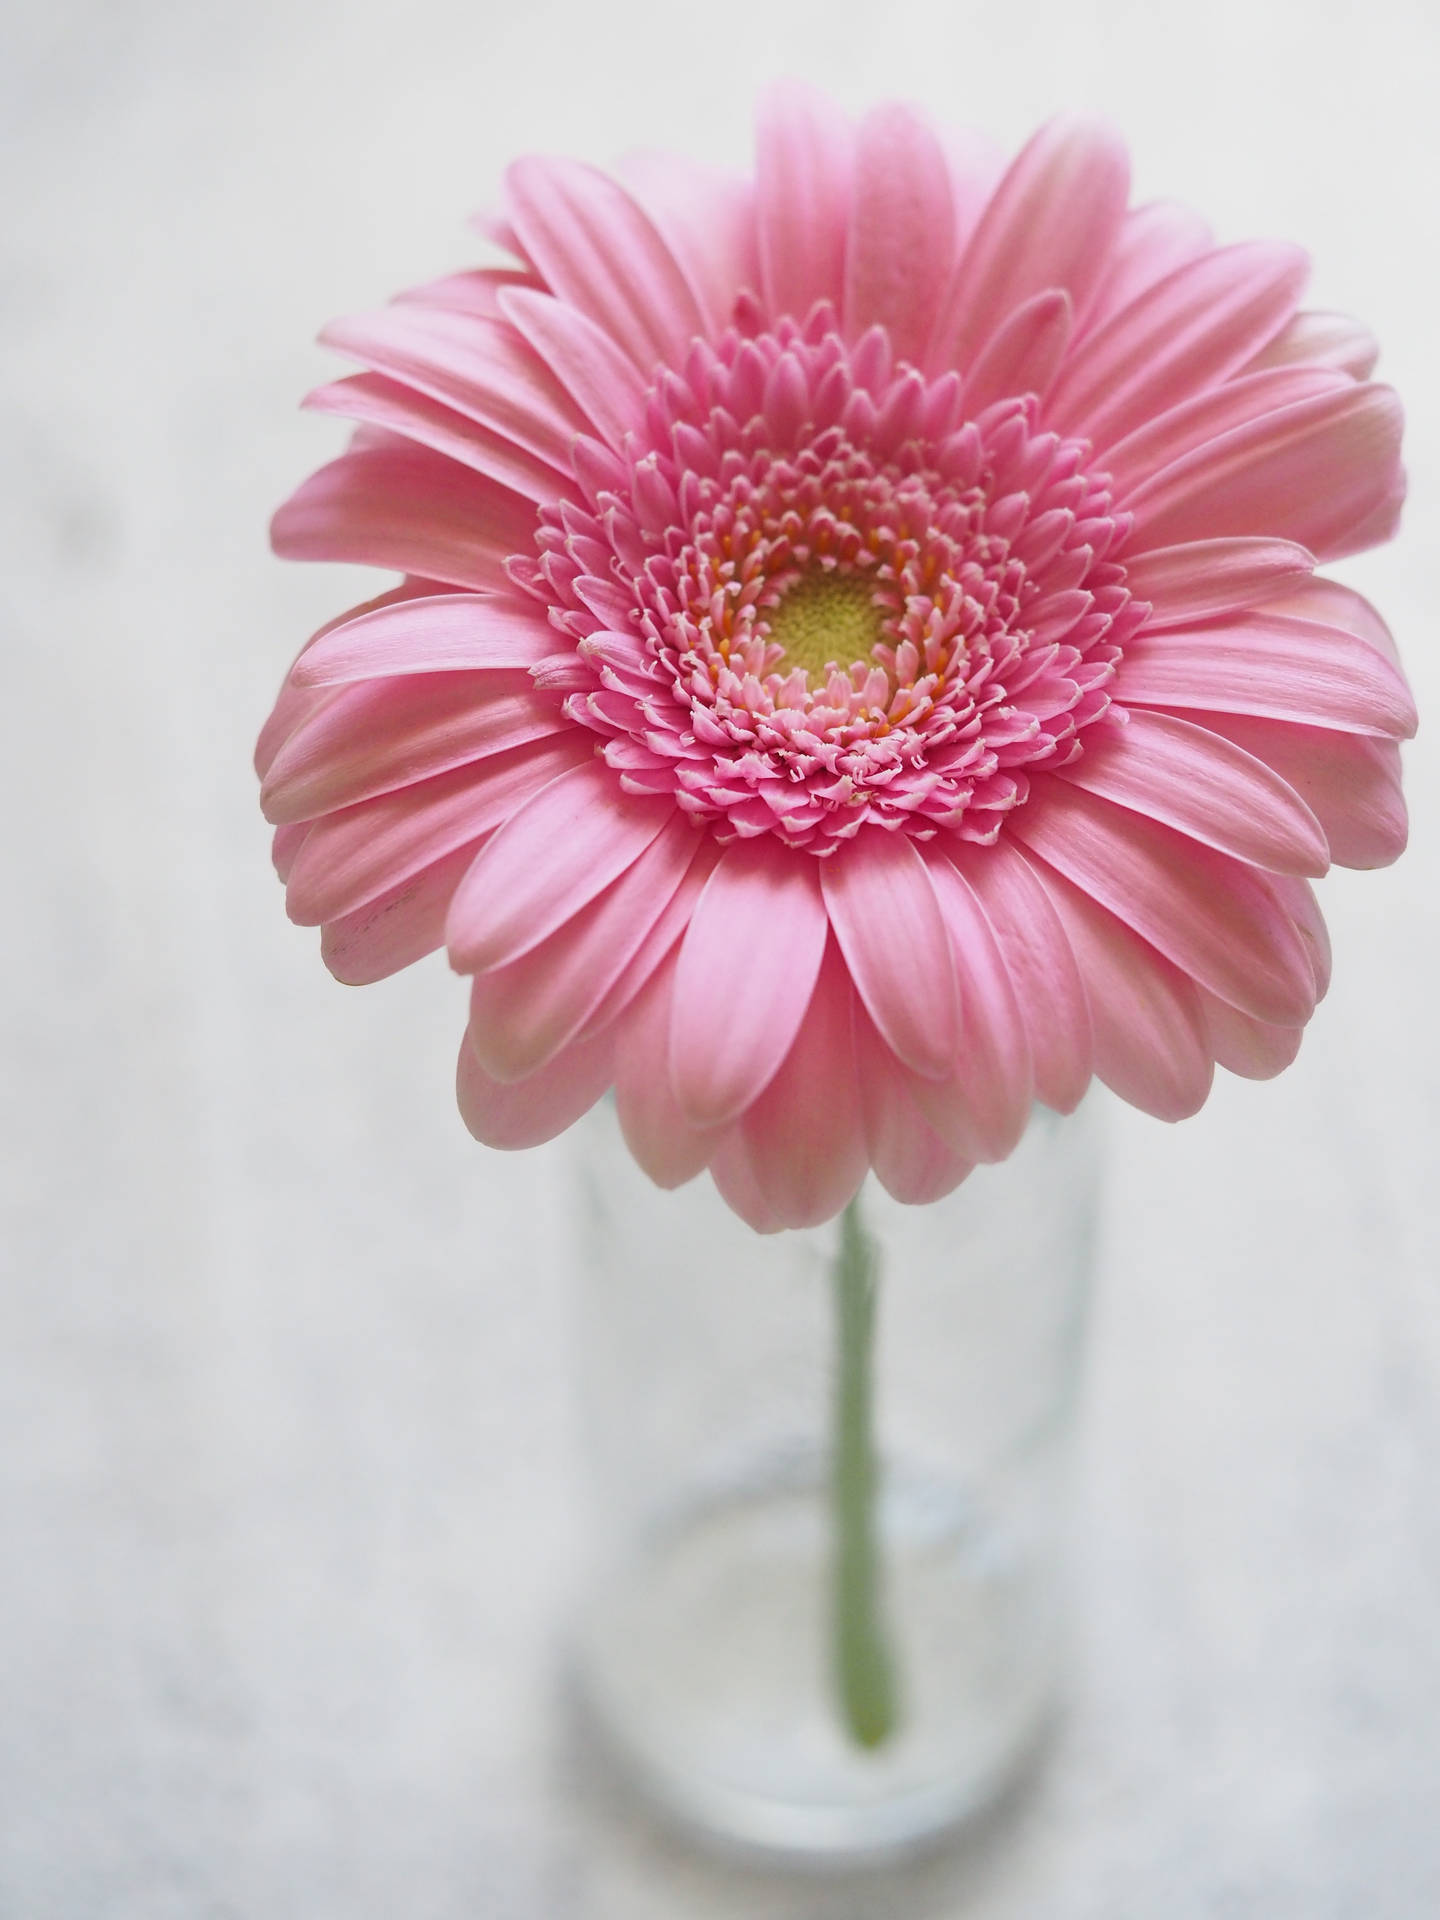 Tranquility in Blooms - A Burst of Pink Gerbera Aesthetics Wallpaper